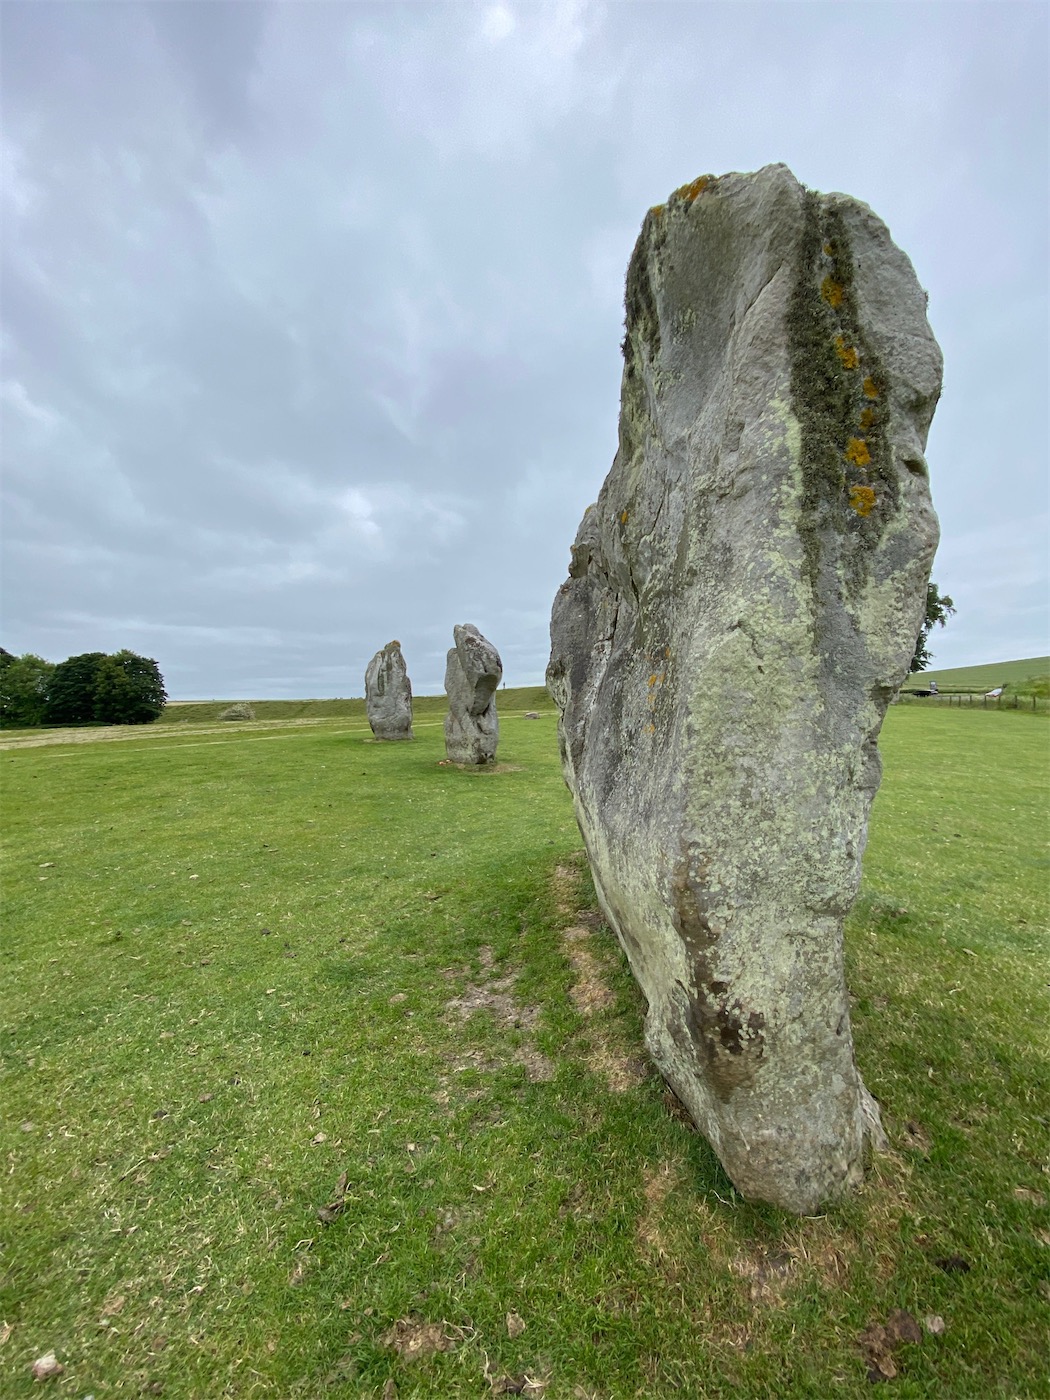 Avebury, another amazing stone circle. Hard to tell, but they're massive.